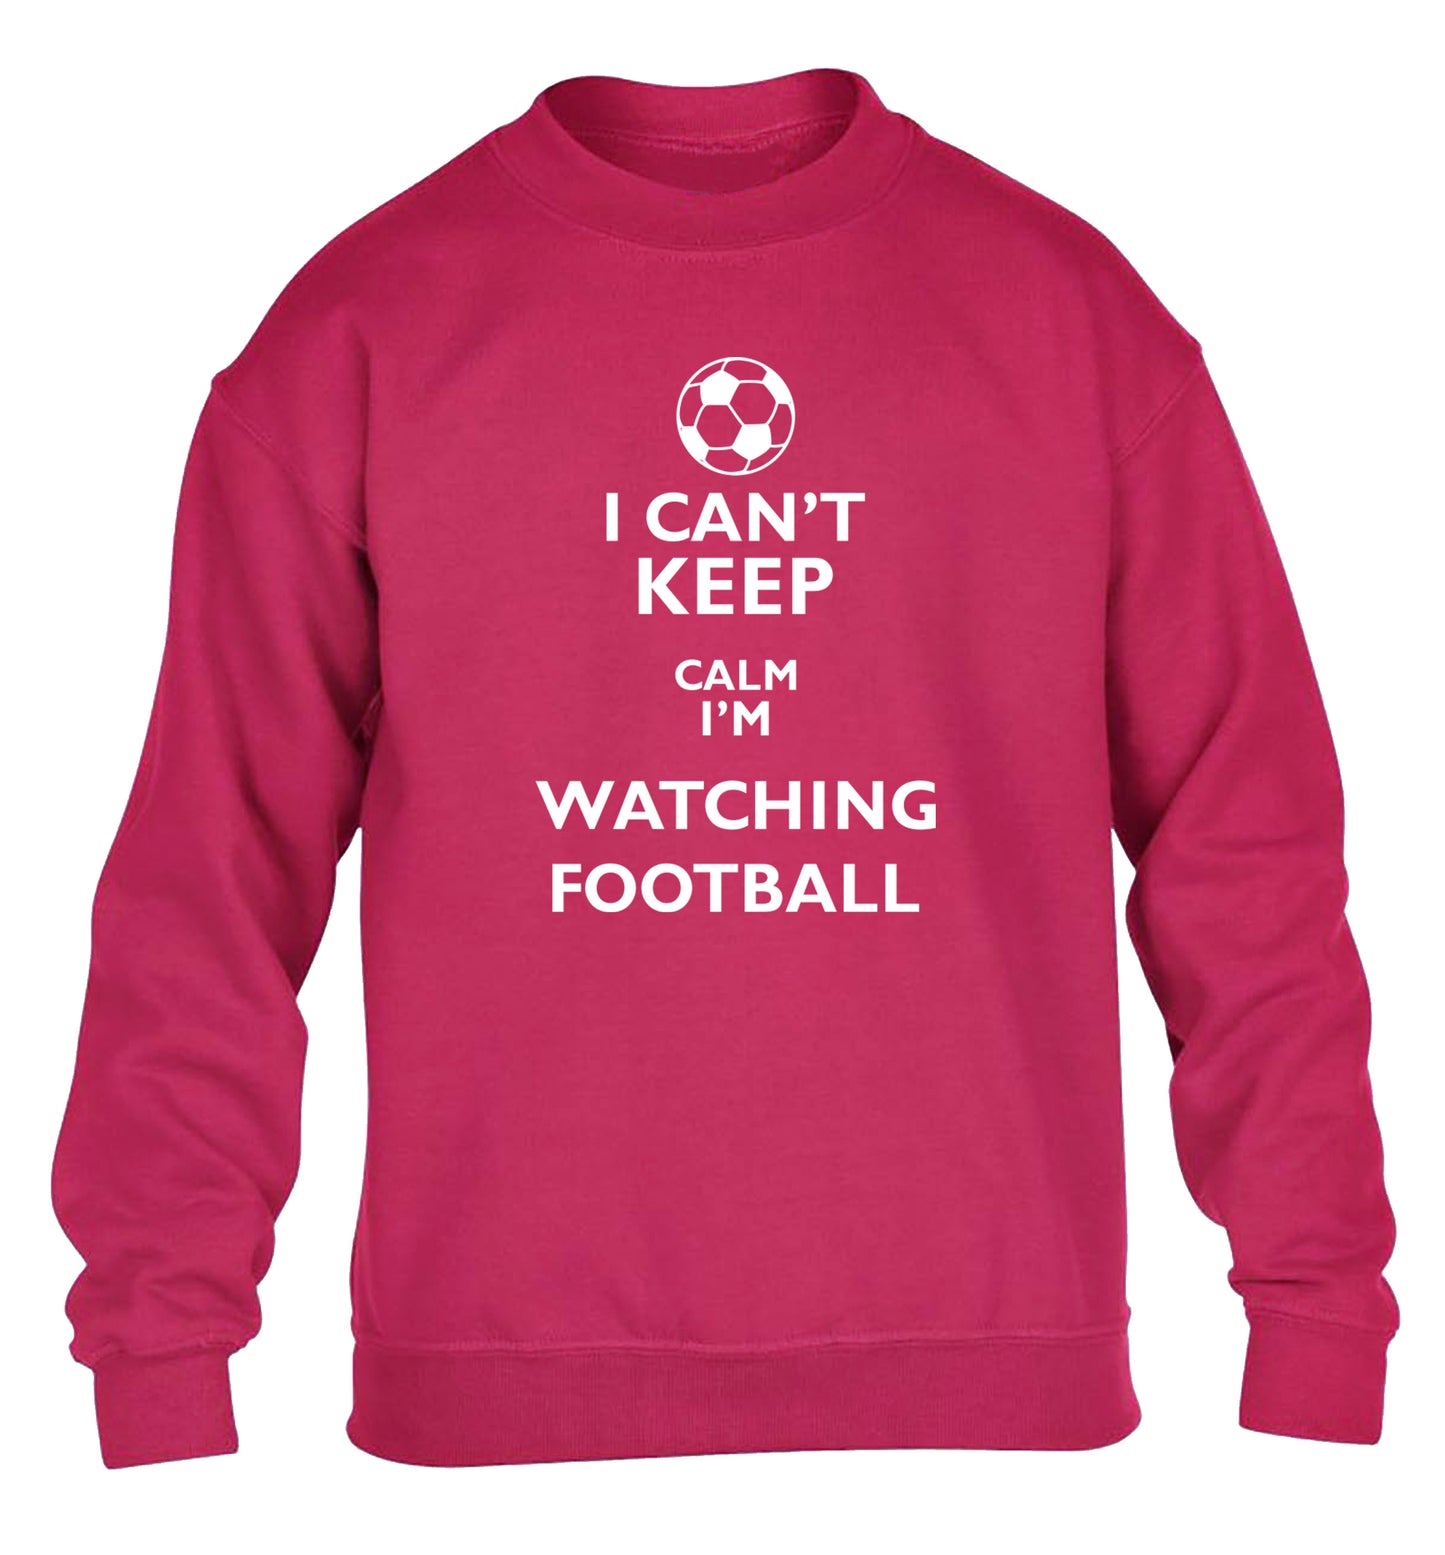 I can't keep calm I'm watching the football children's pink sweater 12-14 Years